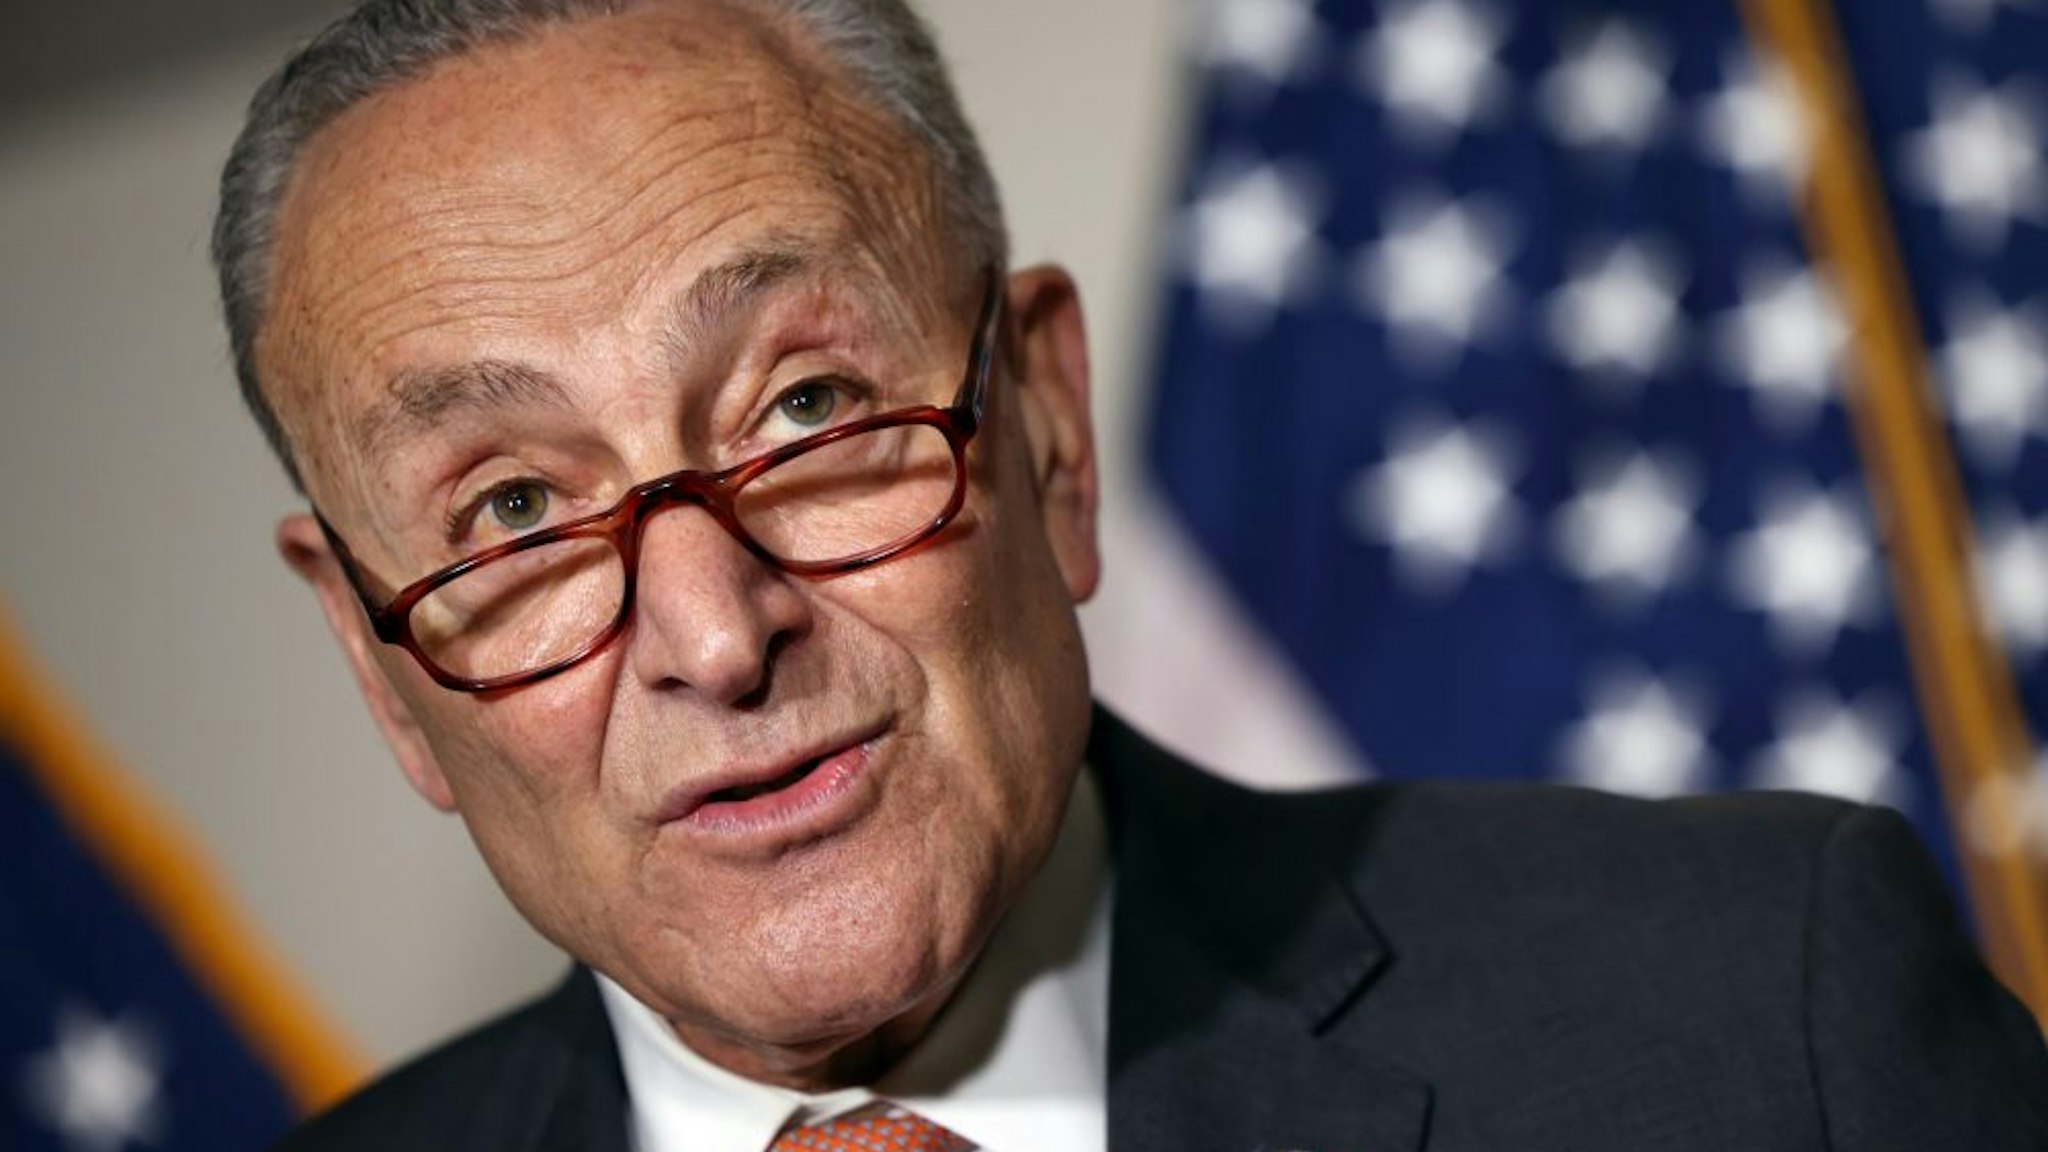 WASHINGTON, DC - JUNE 08: Senate Majority Leader Charles Schumer (D-NY) speaks at a press conference following a Senate Democratic luncheon on Capitol Hill on June 08, 2021 in Washington, DC. Schumer spoke on the equal pay, infrastructure and Democratic judicial nominees.